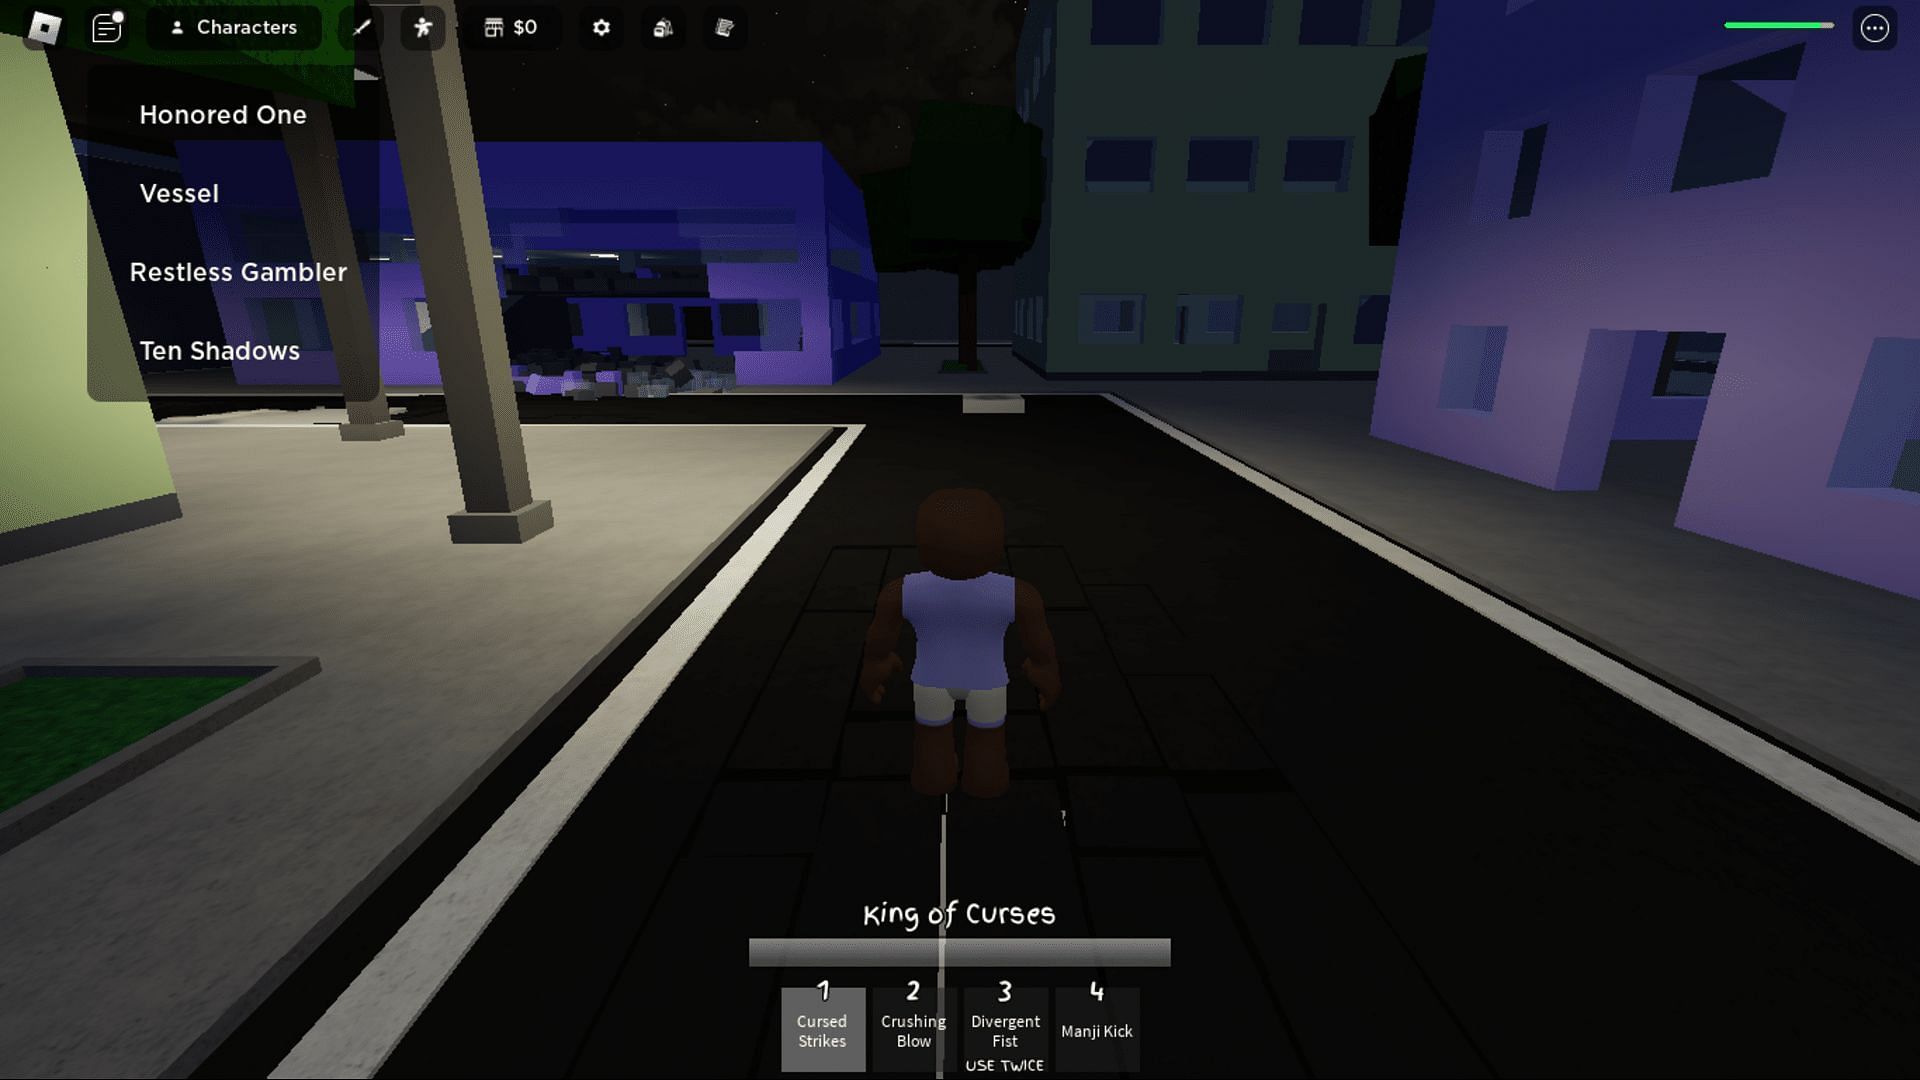 All characters in Jujutsu Shenanigans (Image via Roblox)